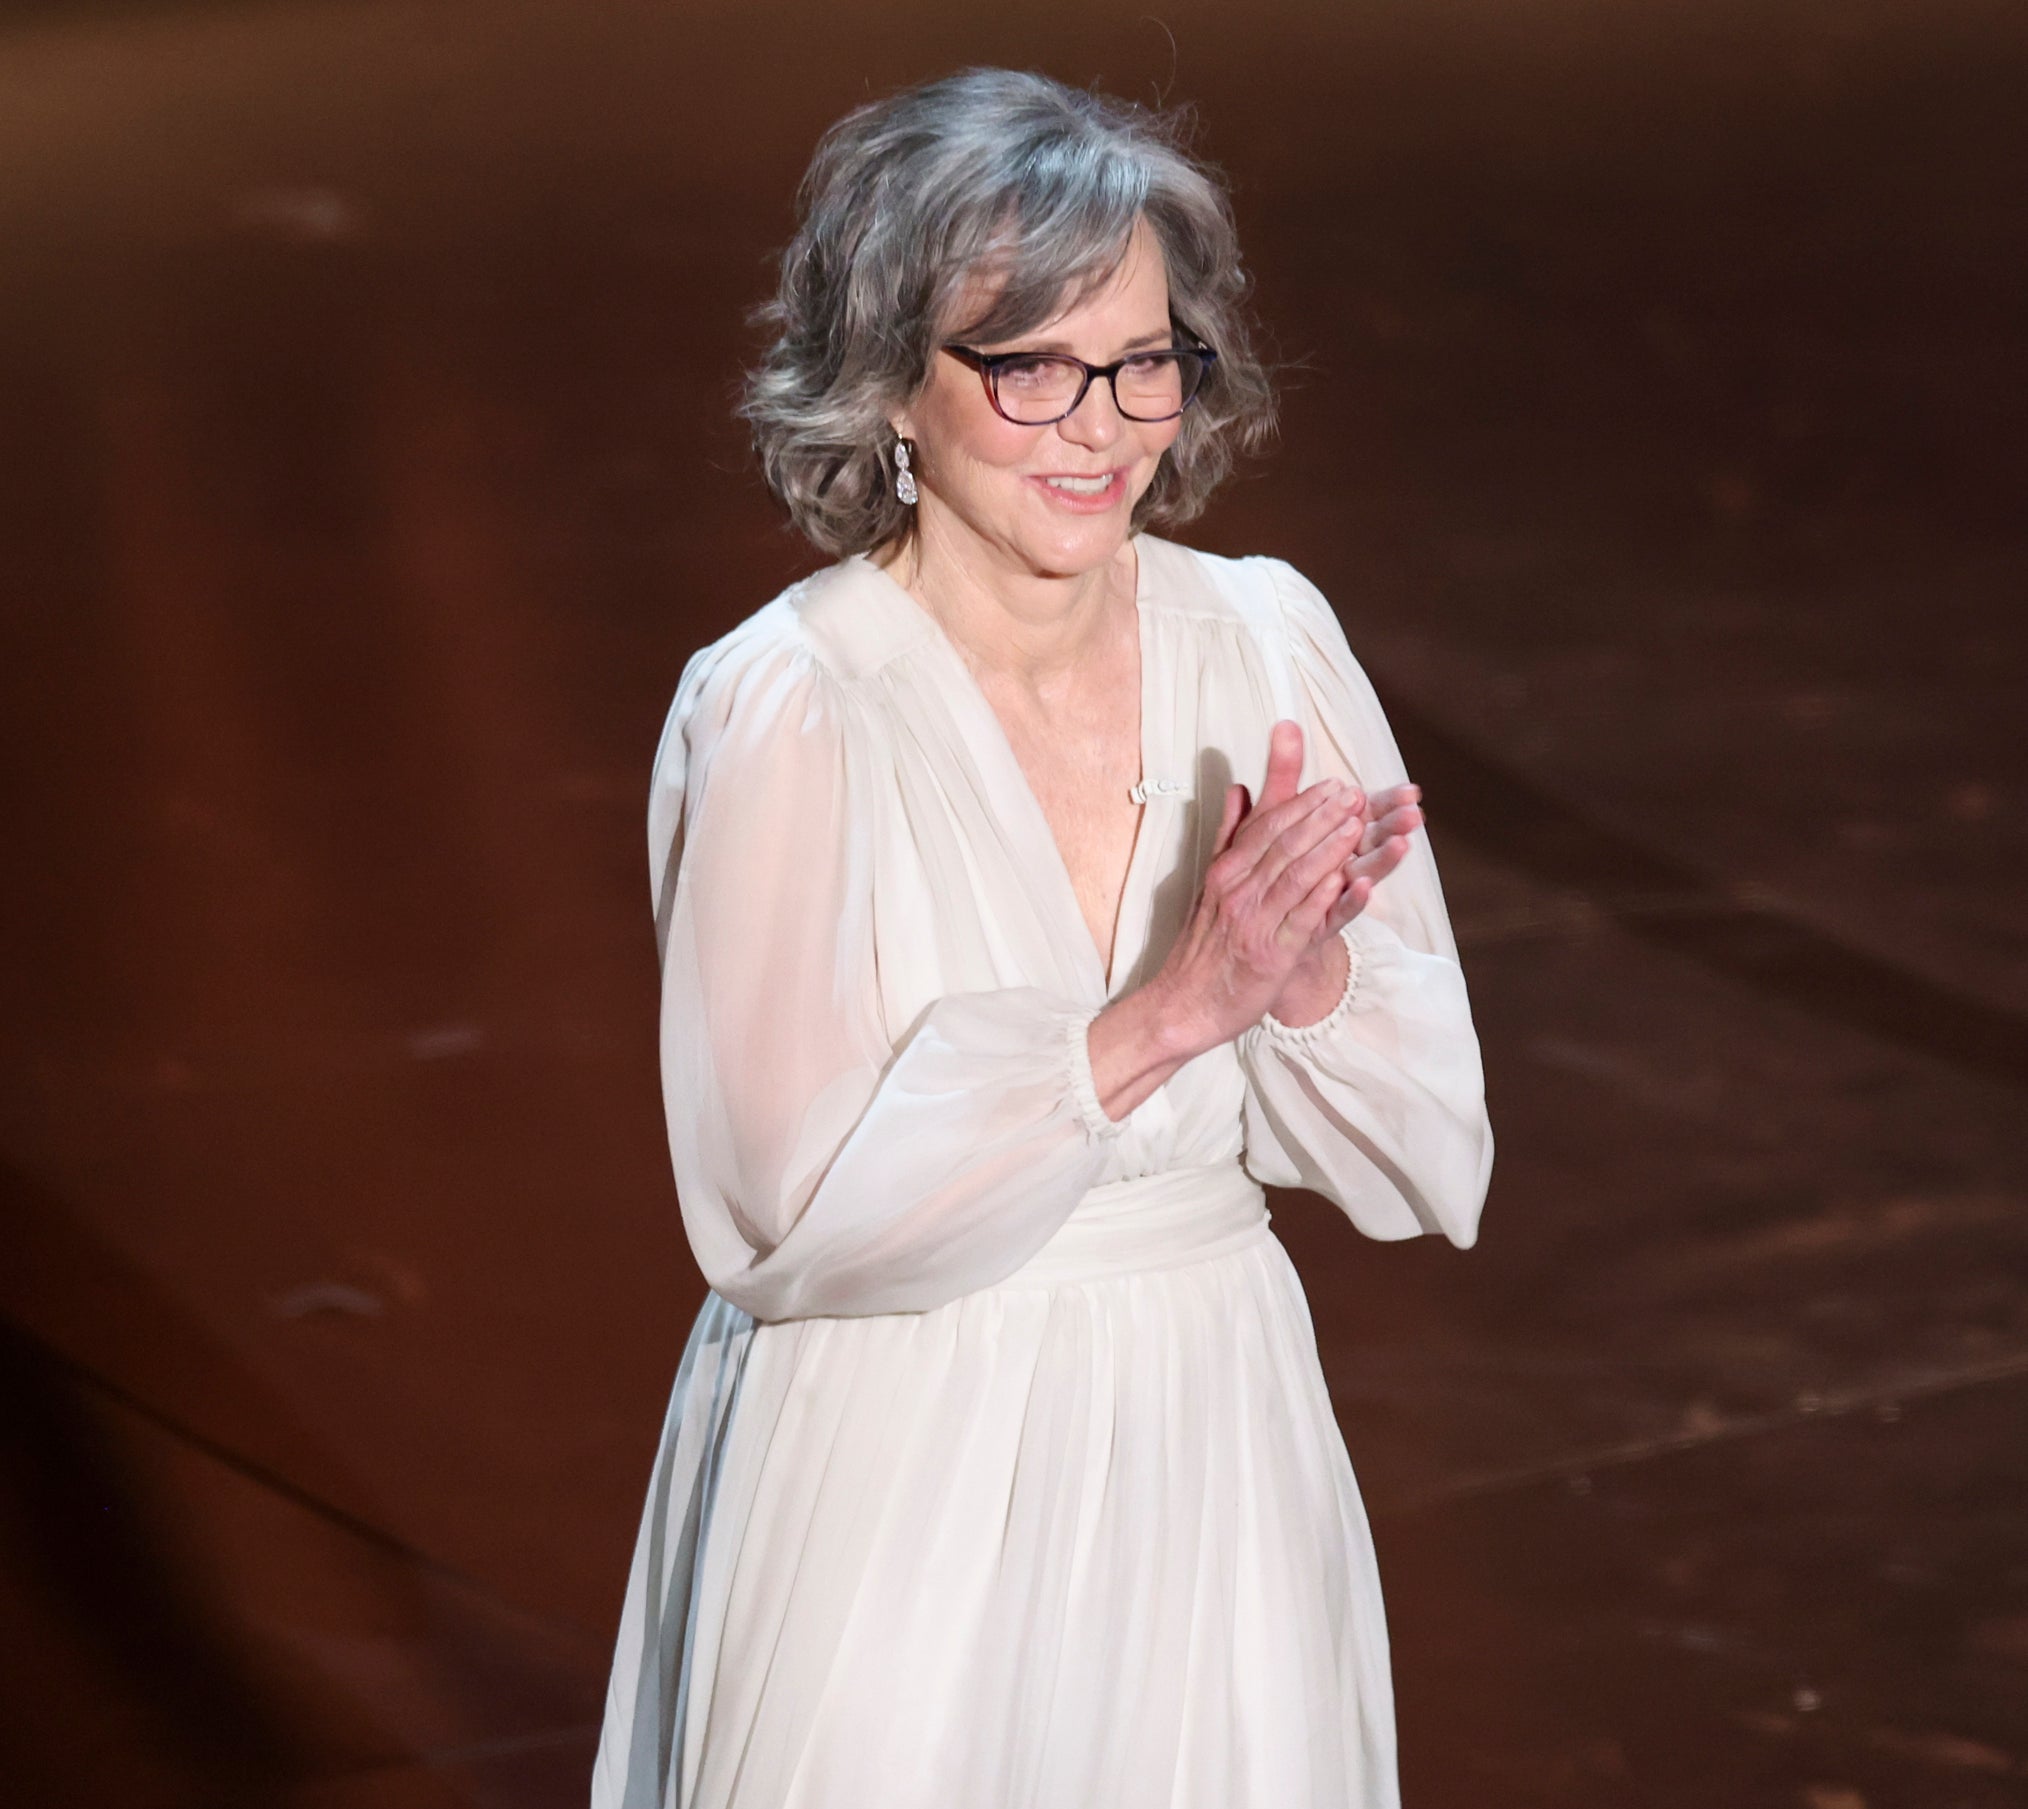 Sally Field stands clapping, wearing a v-neck dress with billowing sleeves